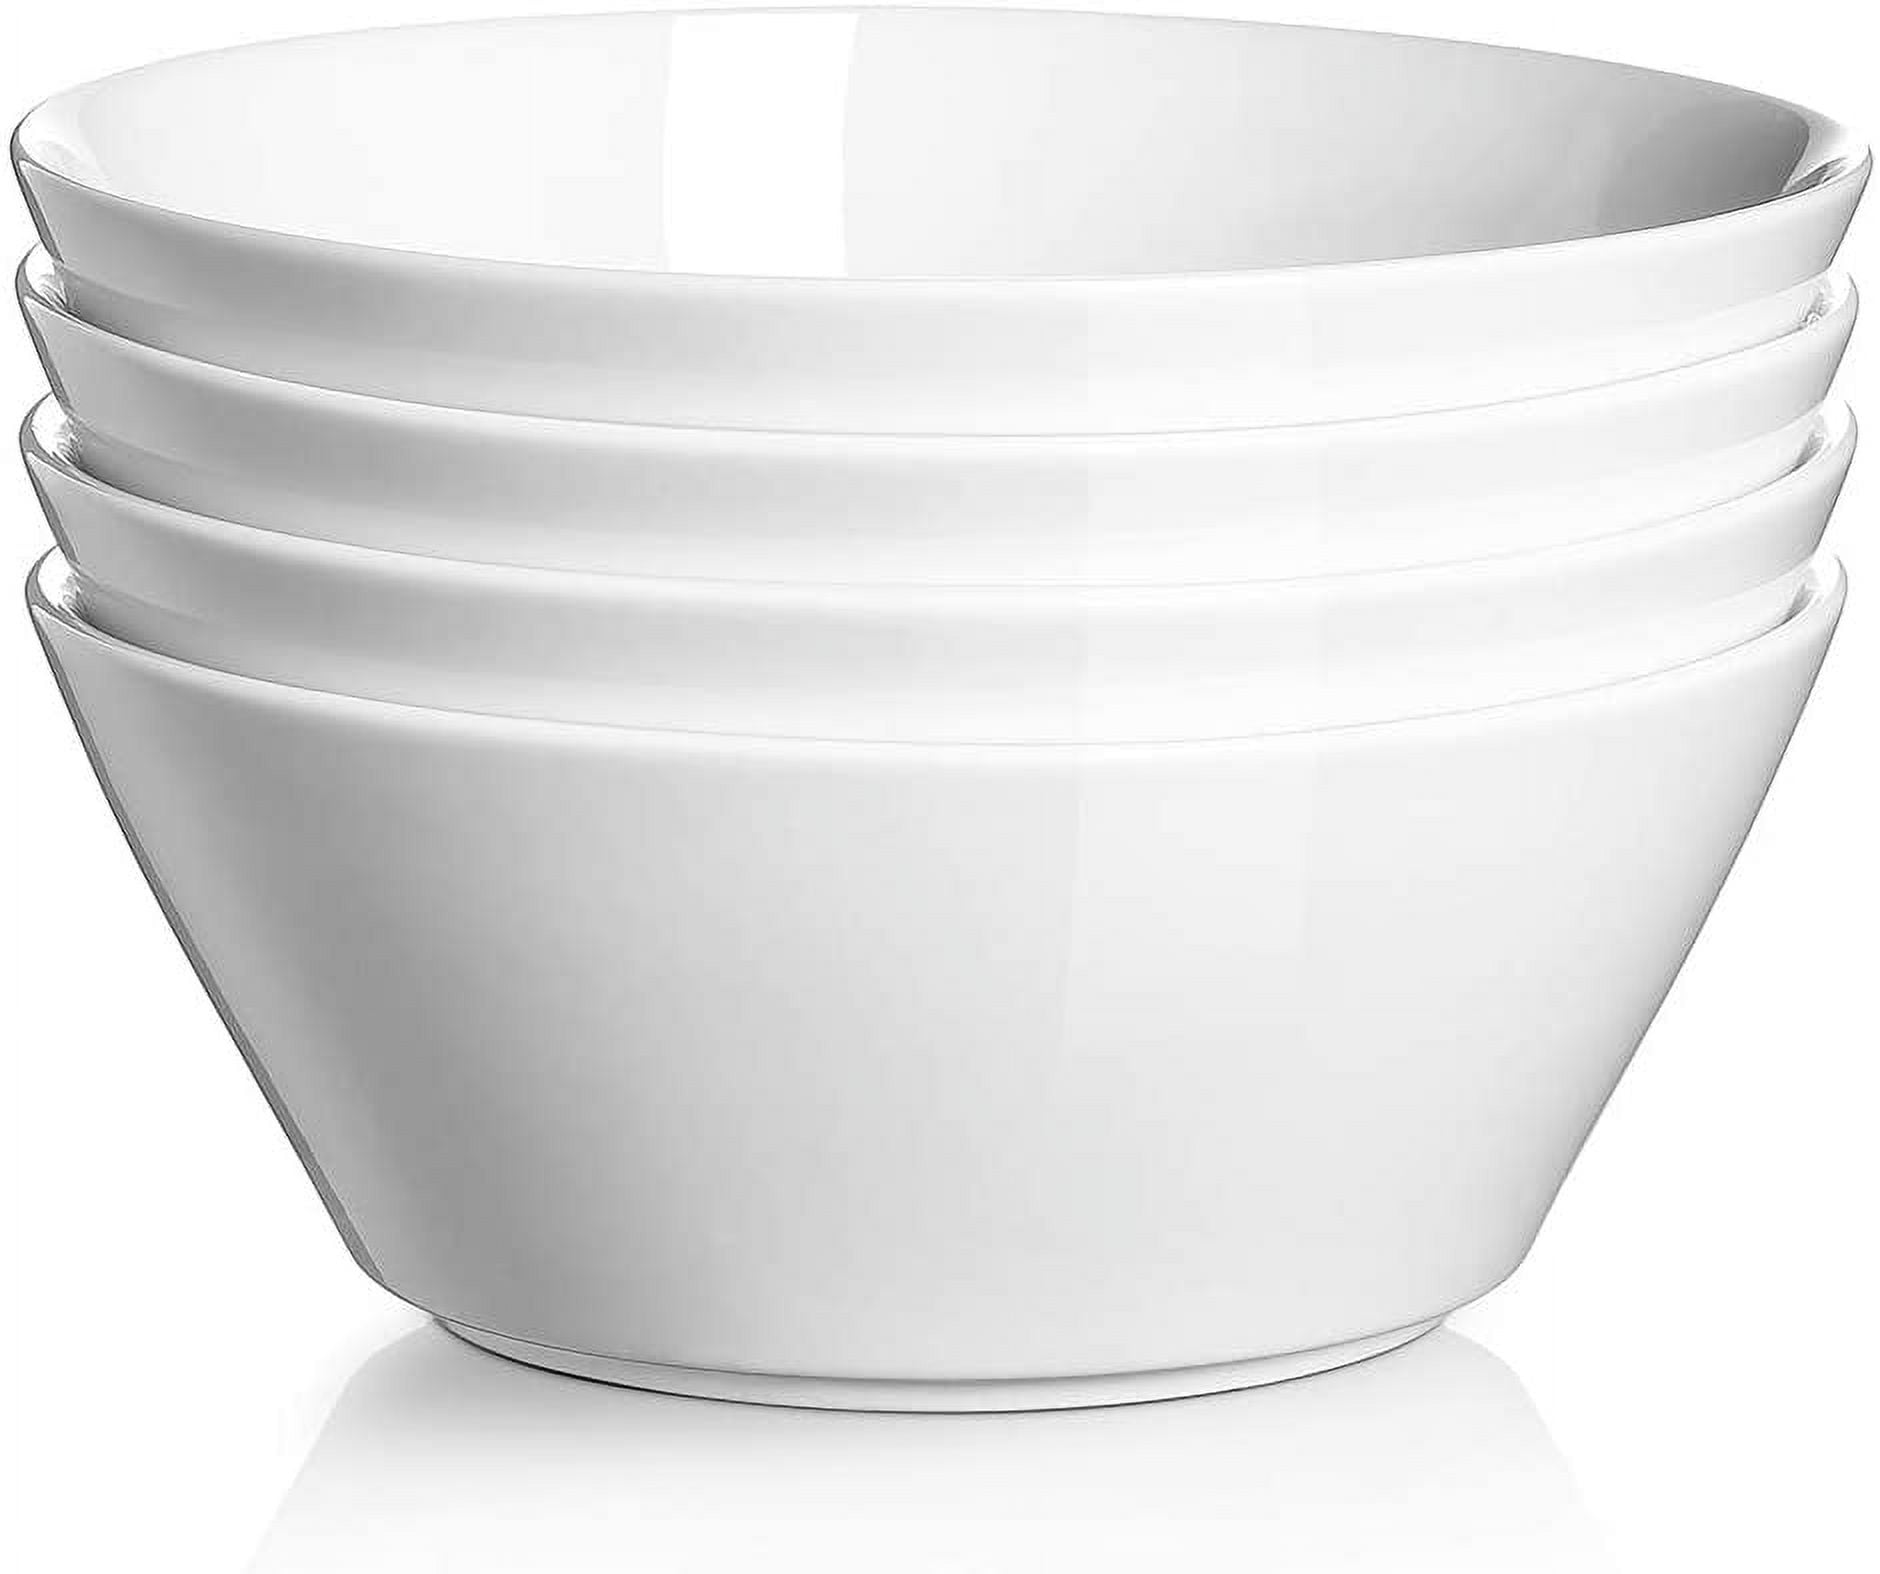 Home-X Set of 2, Microwave Soup Bowls with Lid, BPA Free, Dishwasher Safe,  Dinnerware Kitchen Essentials